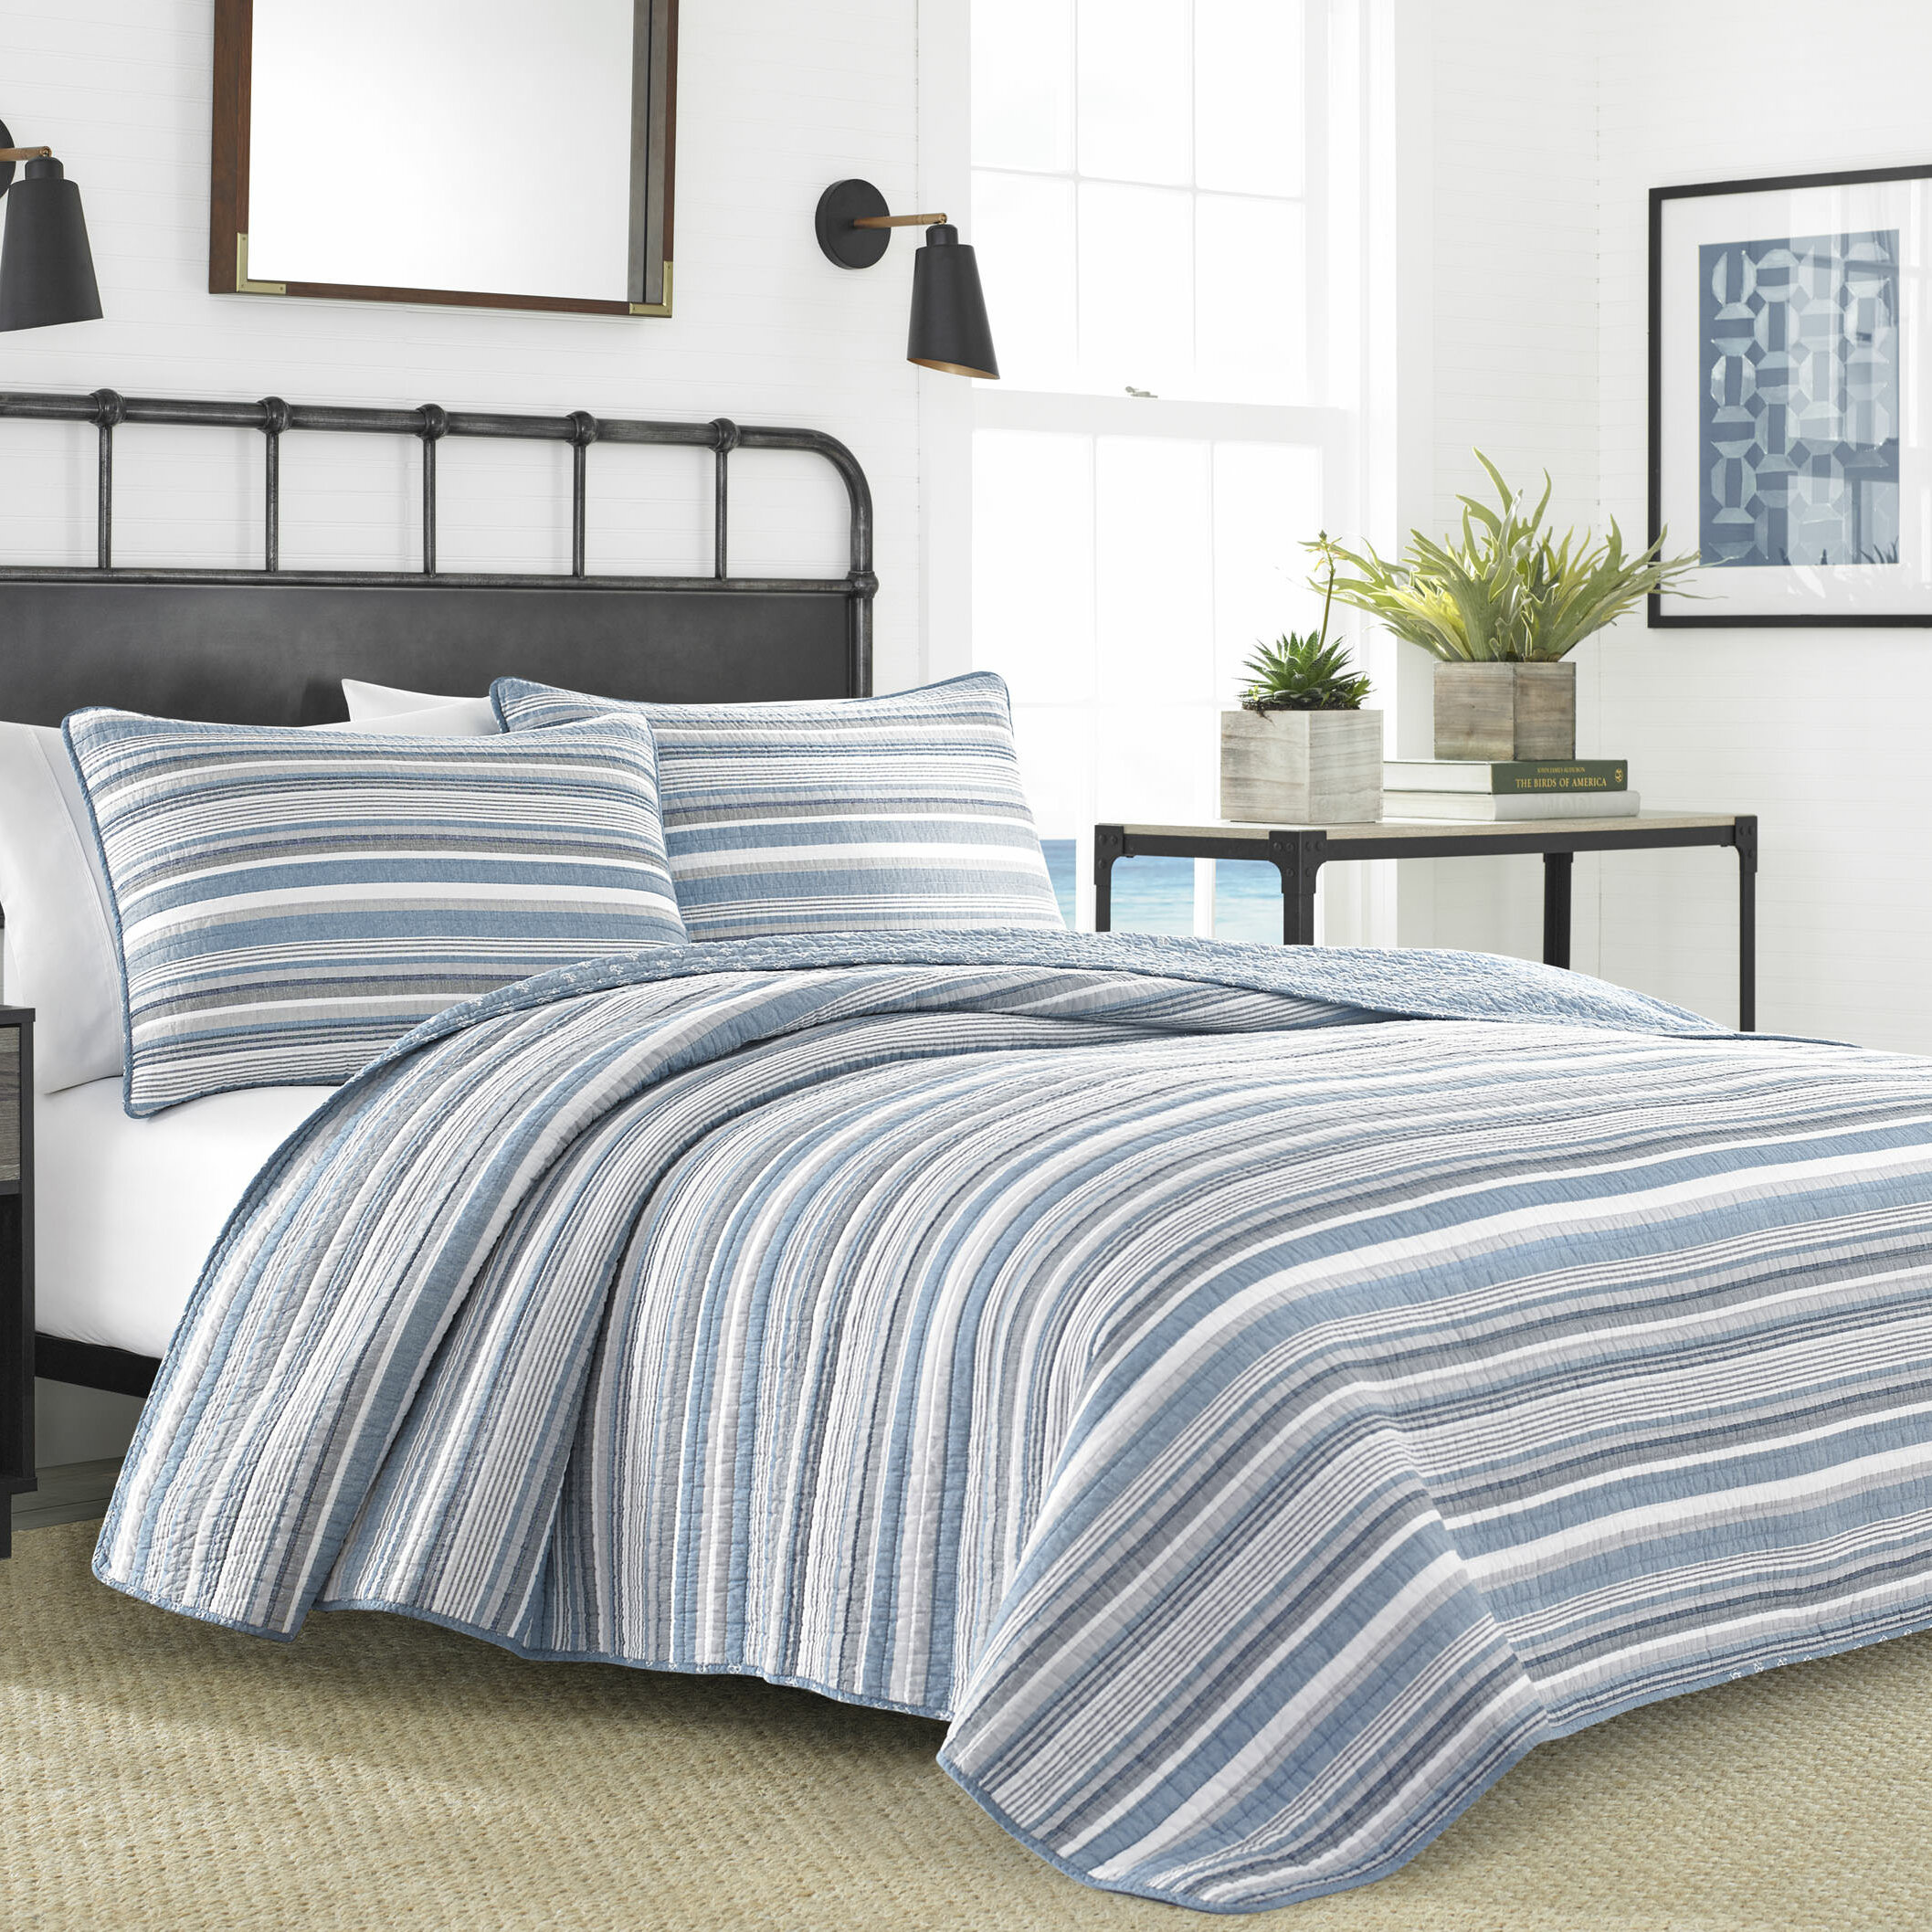  Nautica - Daybed Cover Set, Cotton Reversible Bedding Set with  Matching Shams & Pillow Cover, Home Decor for All Seasons (Jettison Grey,  Daybed) : Home & Kitchen